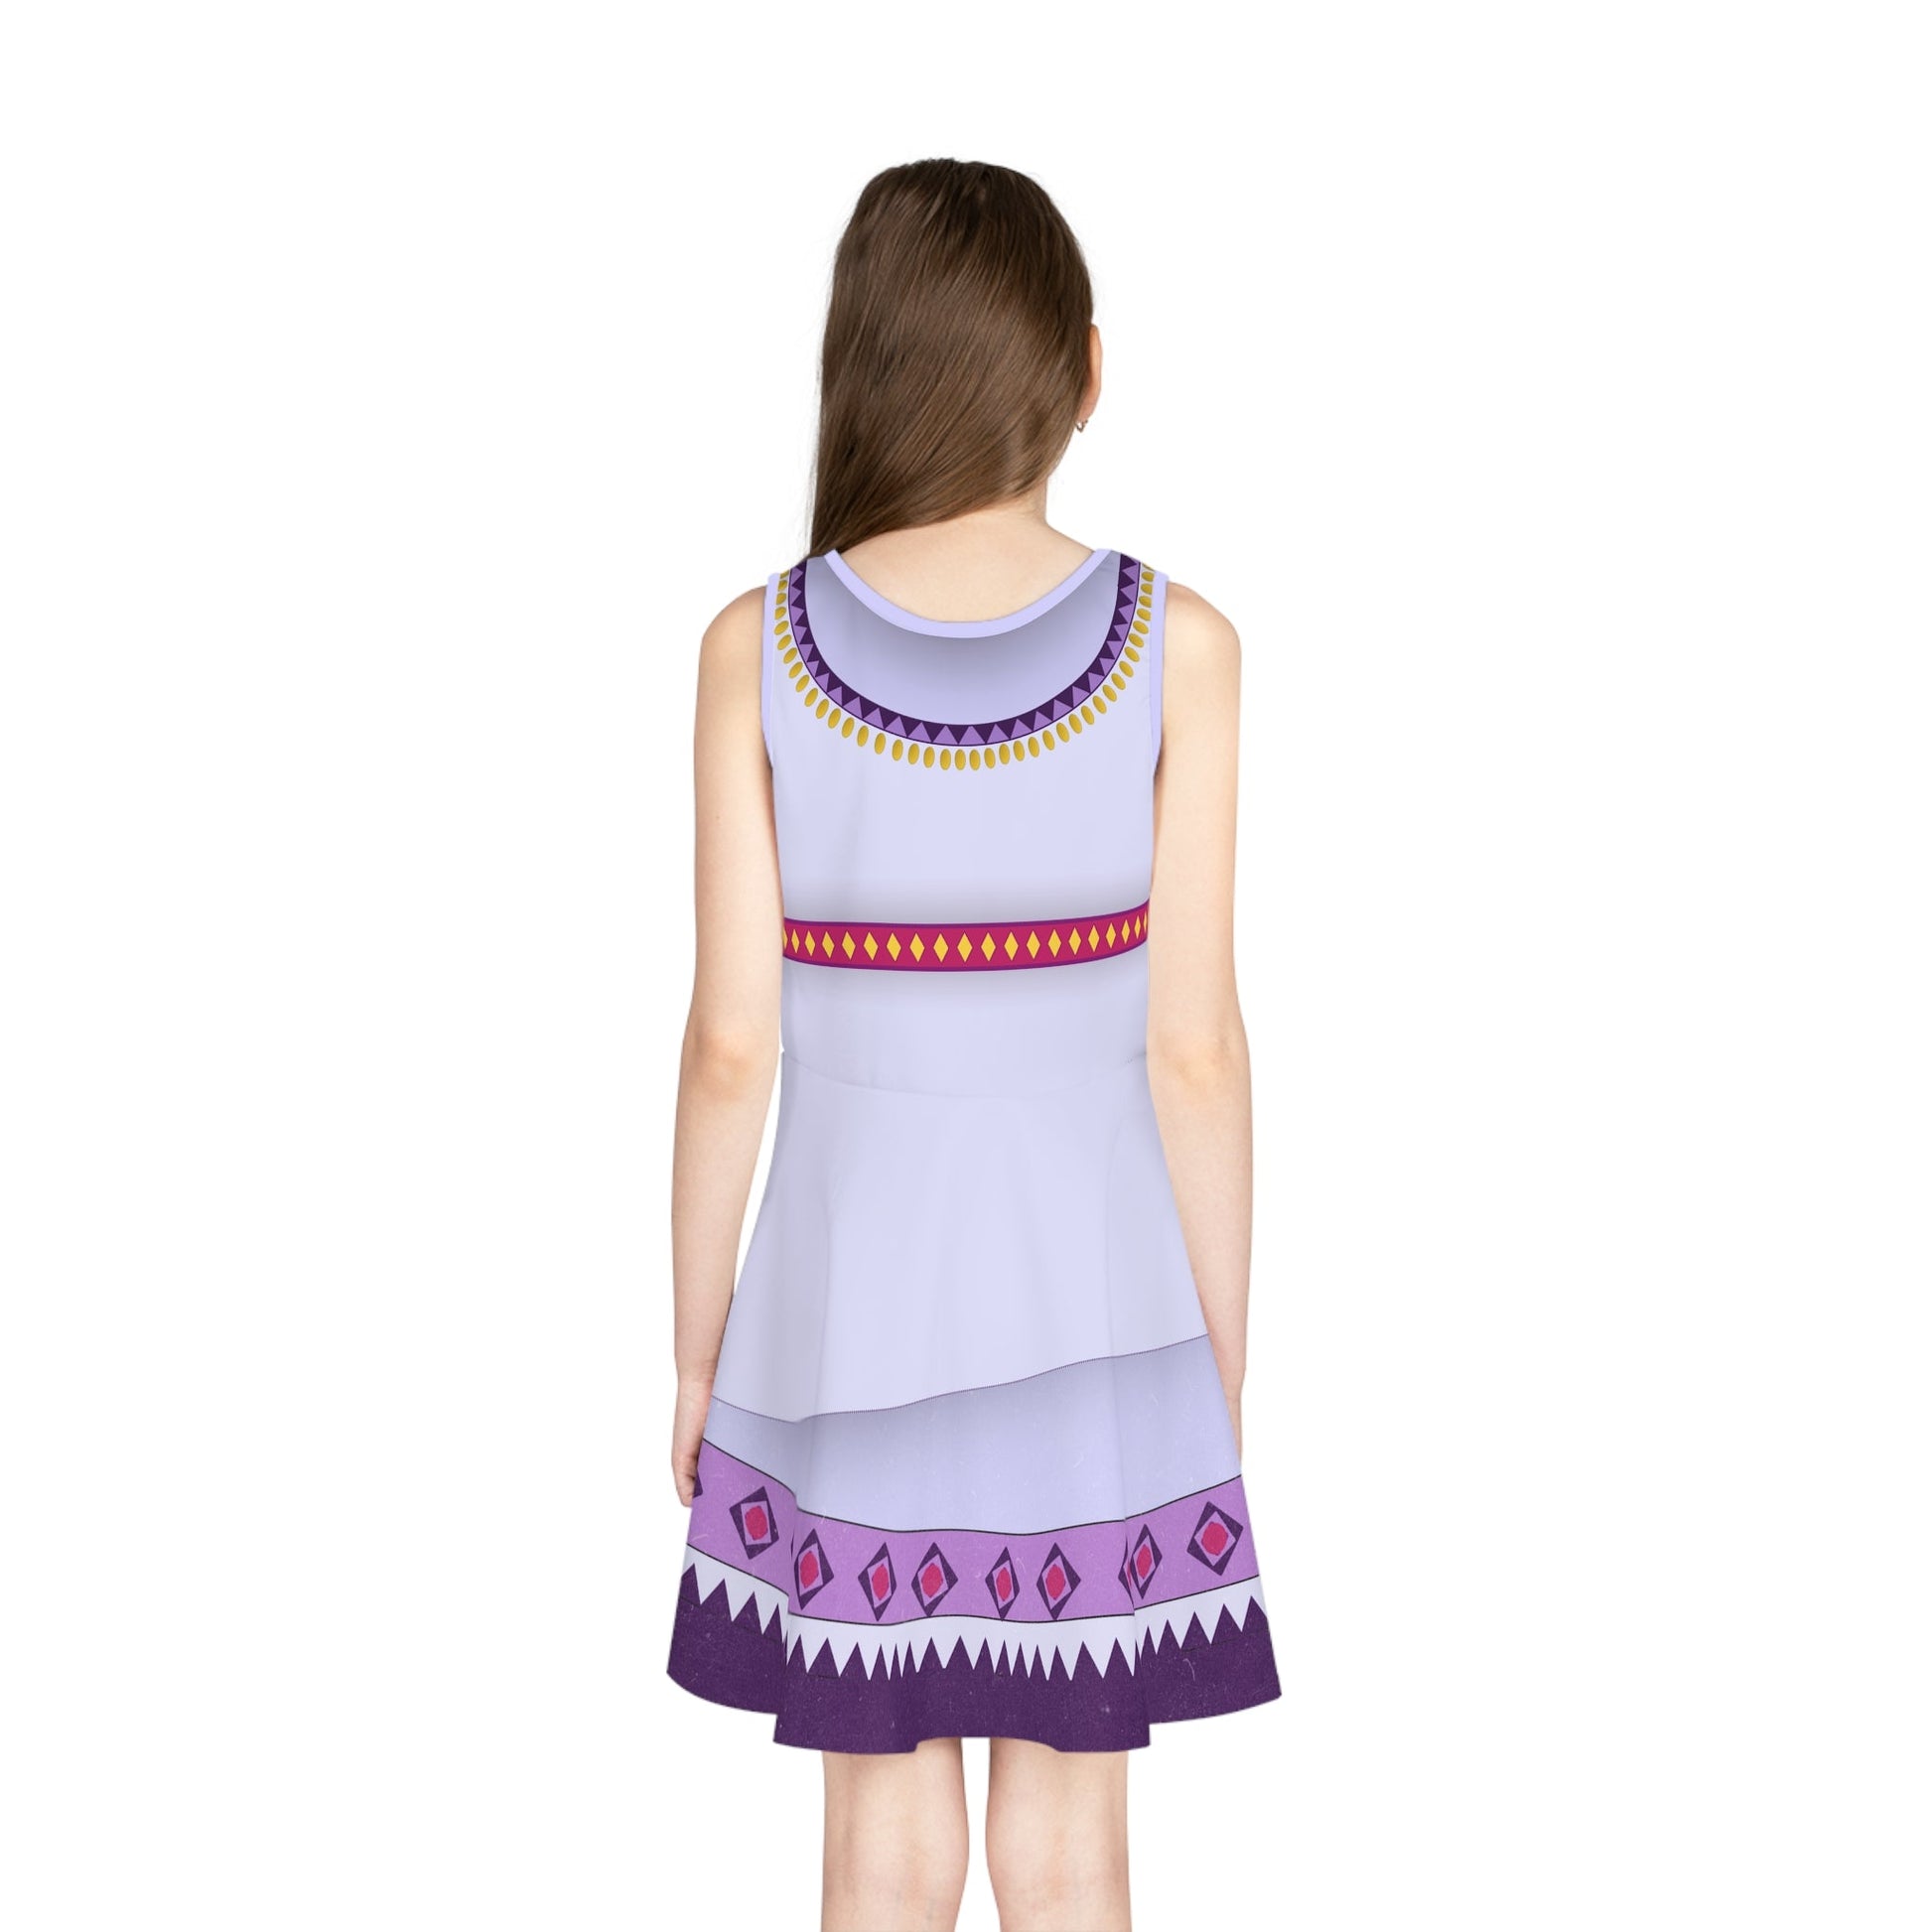 The Asha Girls' Sleeveless Sundress All Over PrintAOPAll Over PrintsLittle Lady Shay Boutique